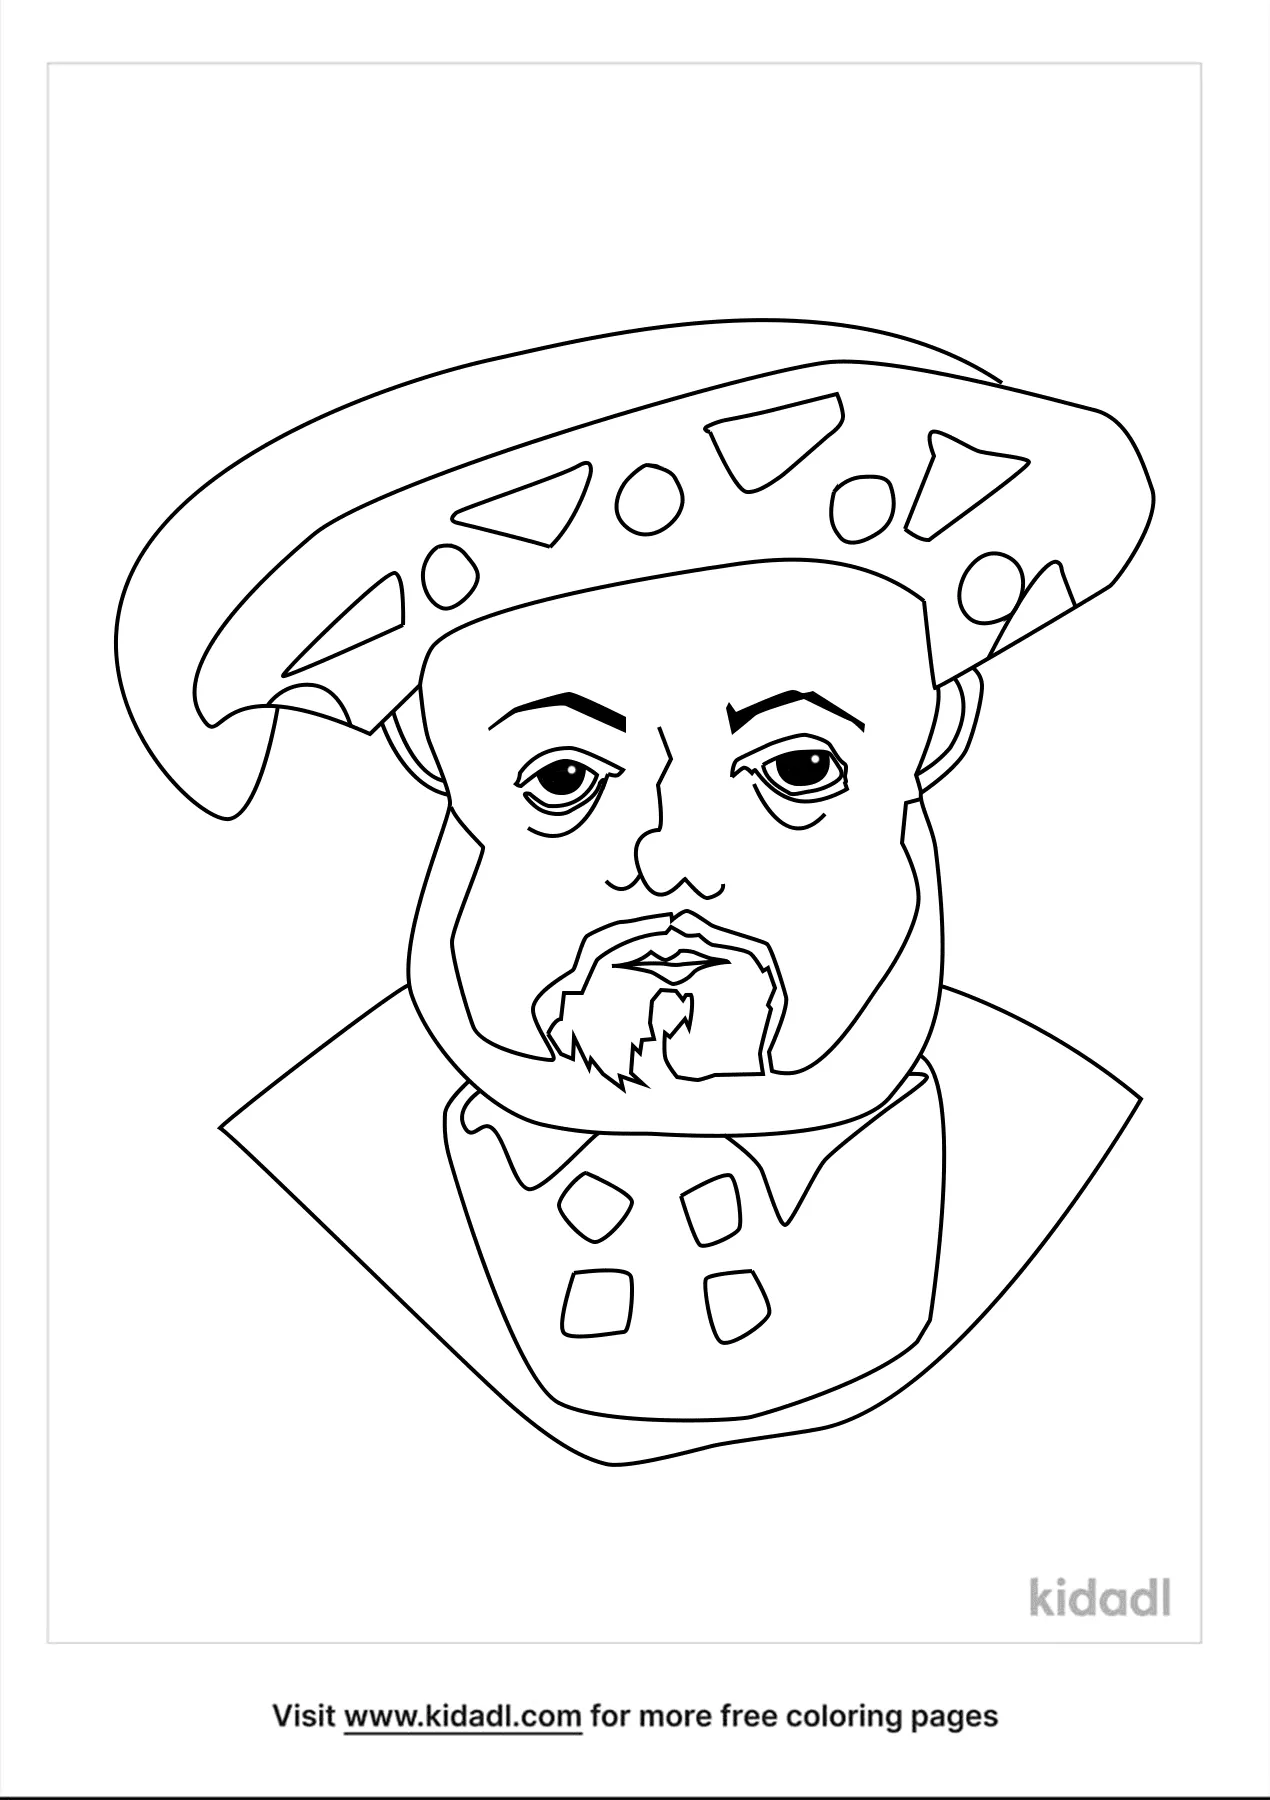 Free King Henry Viii Coloring Page | Coloring Page Printables | Kidadl